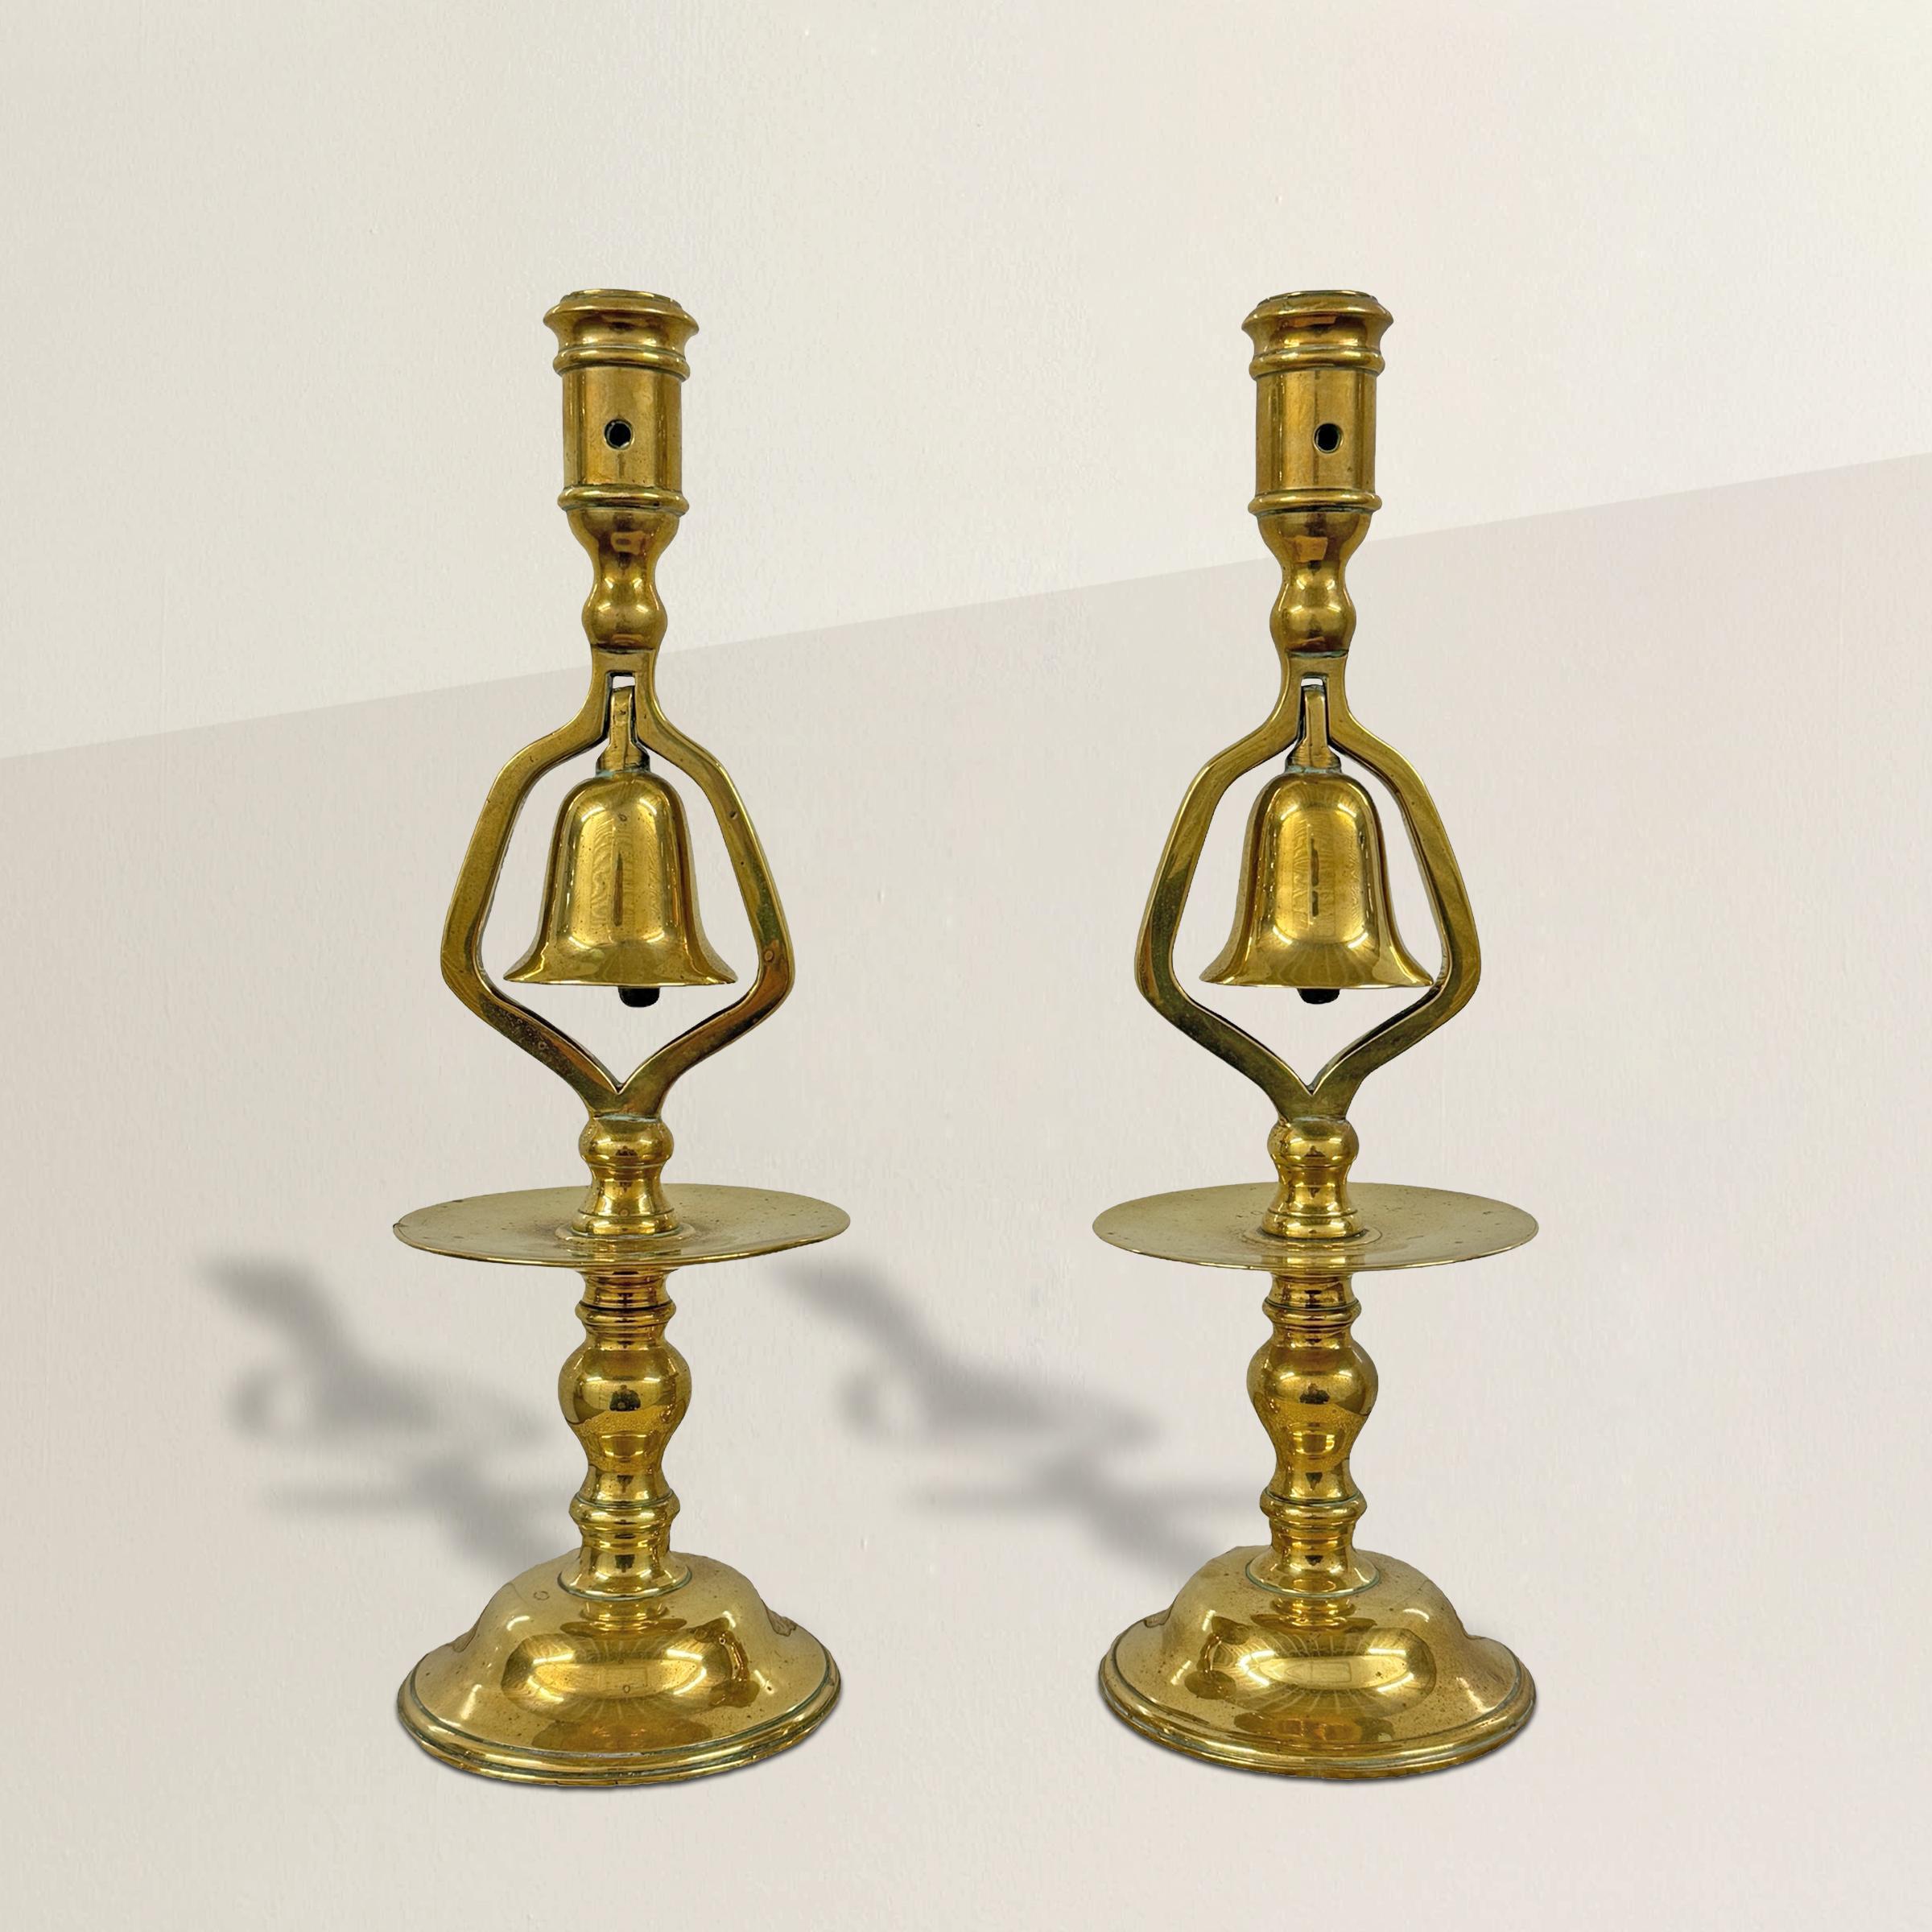 This pair of 19th-century English brass candlesticks embodies the charm and ingenuity of a bygone era. Crafted with meticulous attention to detail, these candlesticks feature bells suspended within their elegantly turned columns, a distinctive